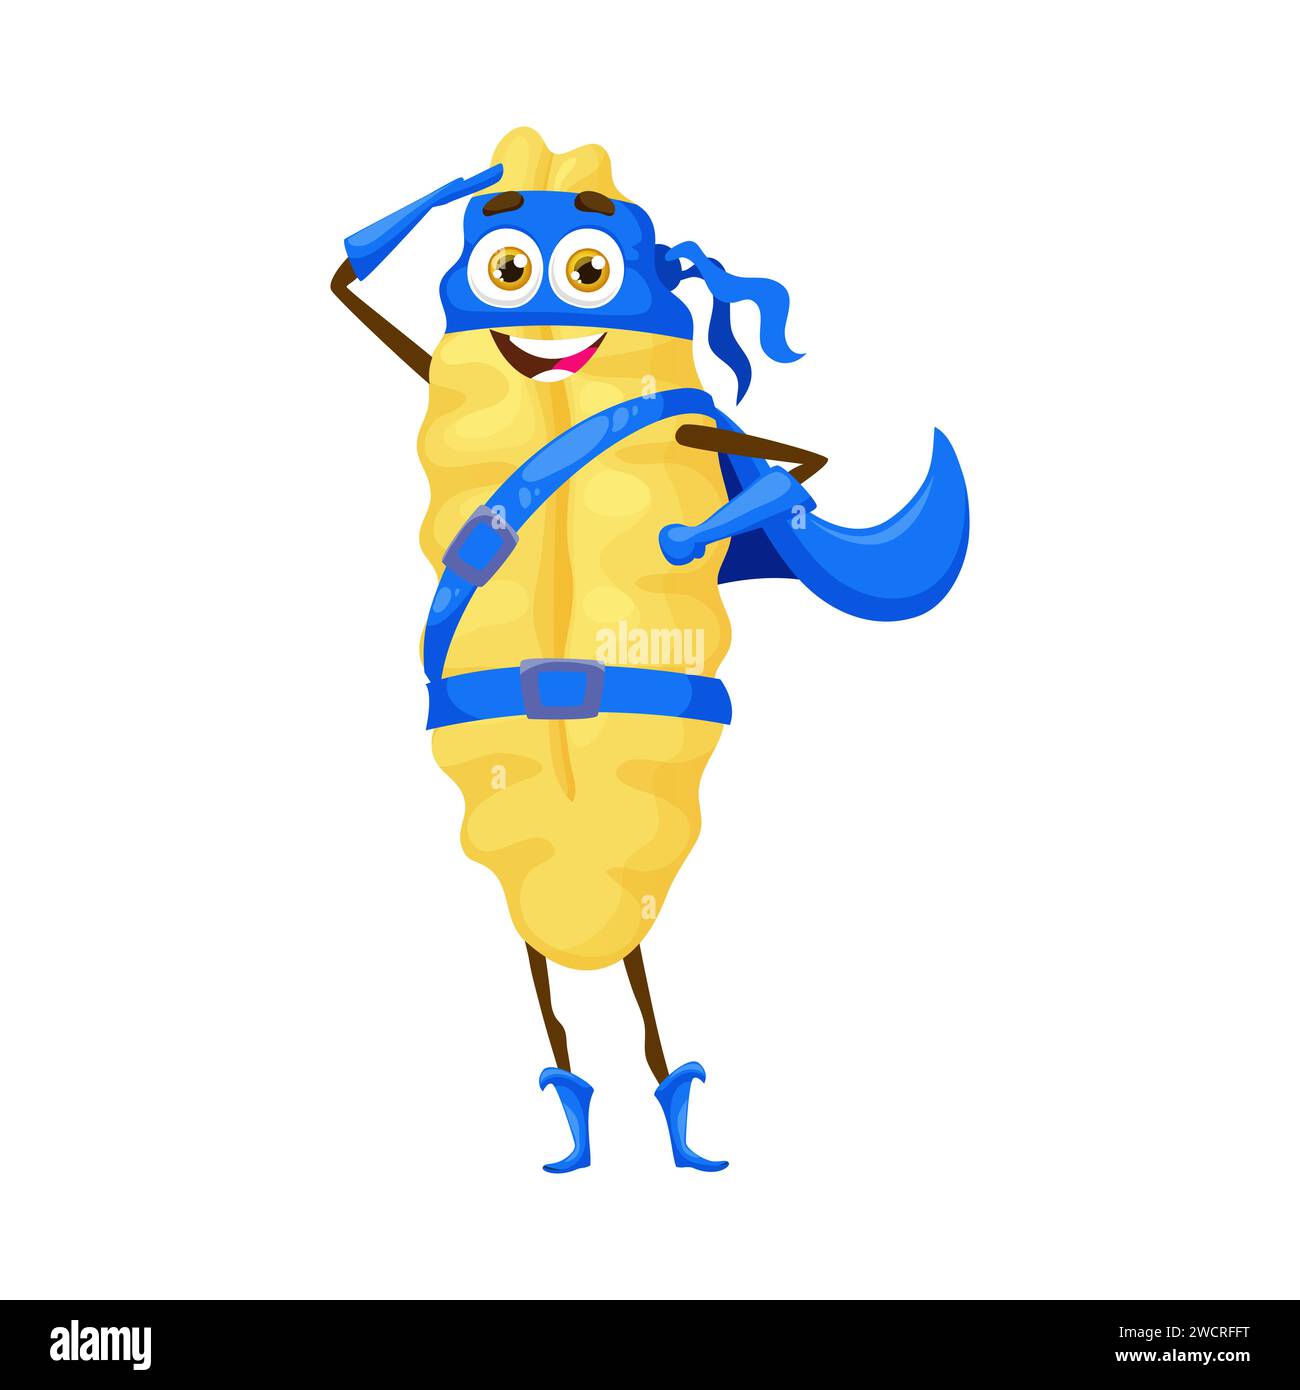 Cartoon gnocchetti sardi italian pasta food superhero character. Isolated vector lively super hero macaroni personage adorned with animated features and blue costume that reflects their heroic nature Stock Vector